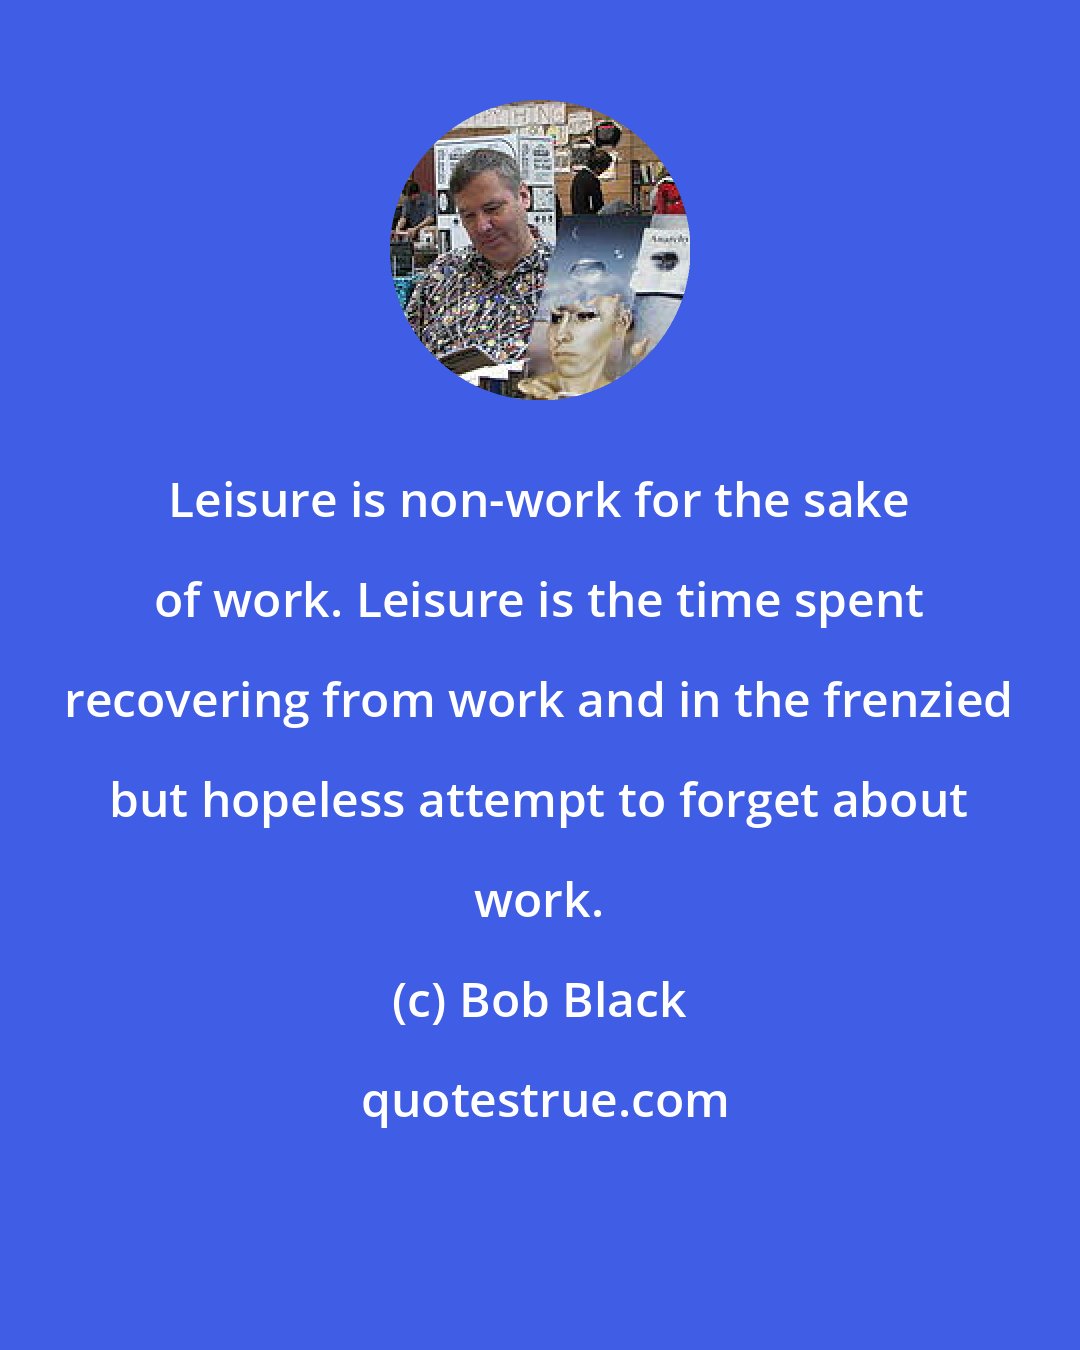 Bob Black: Leisure is non-work for the sake of work. Leisure is the time spent recovering from work and in the frenzied but hopeless attempt to forget about work.